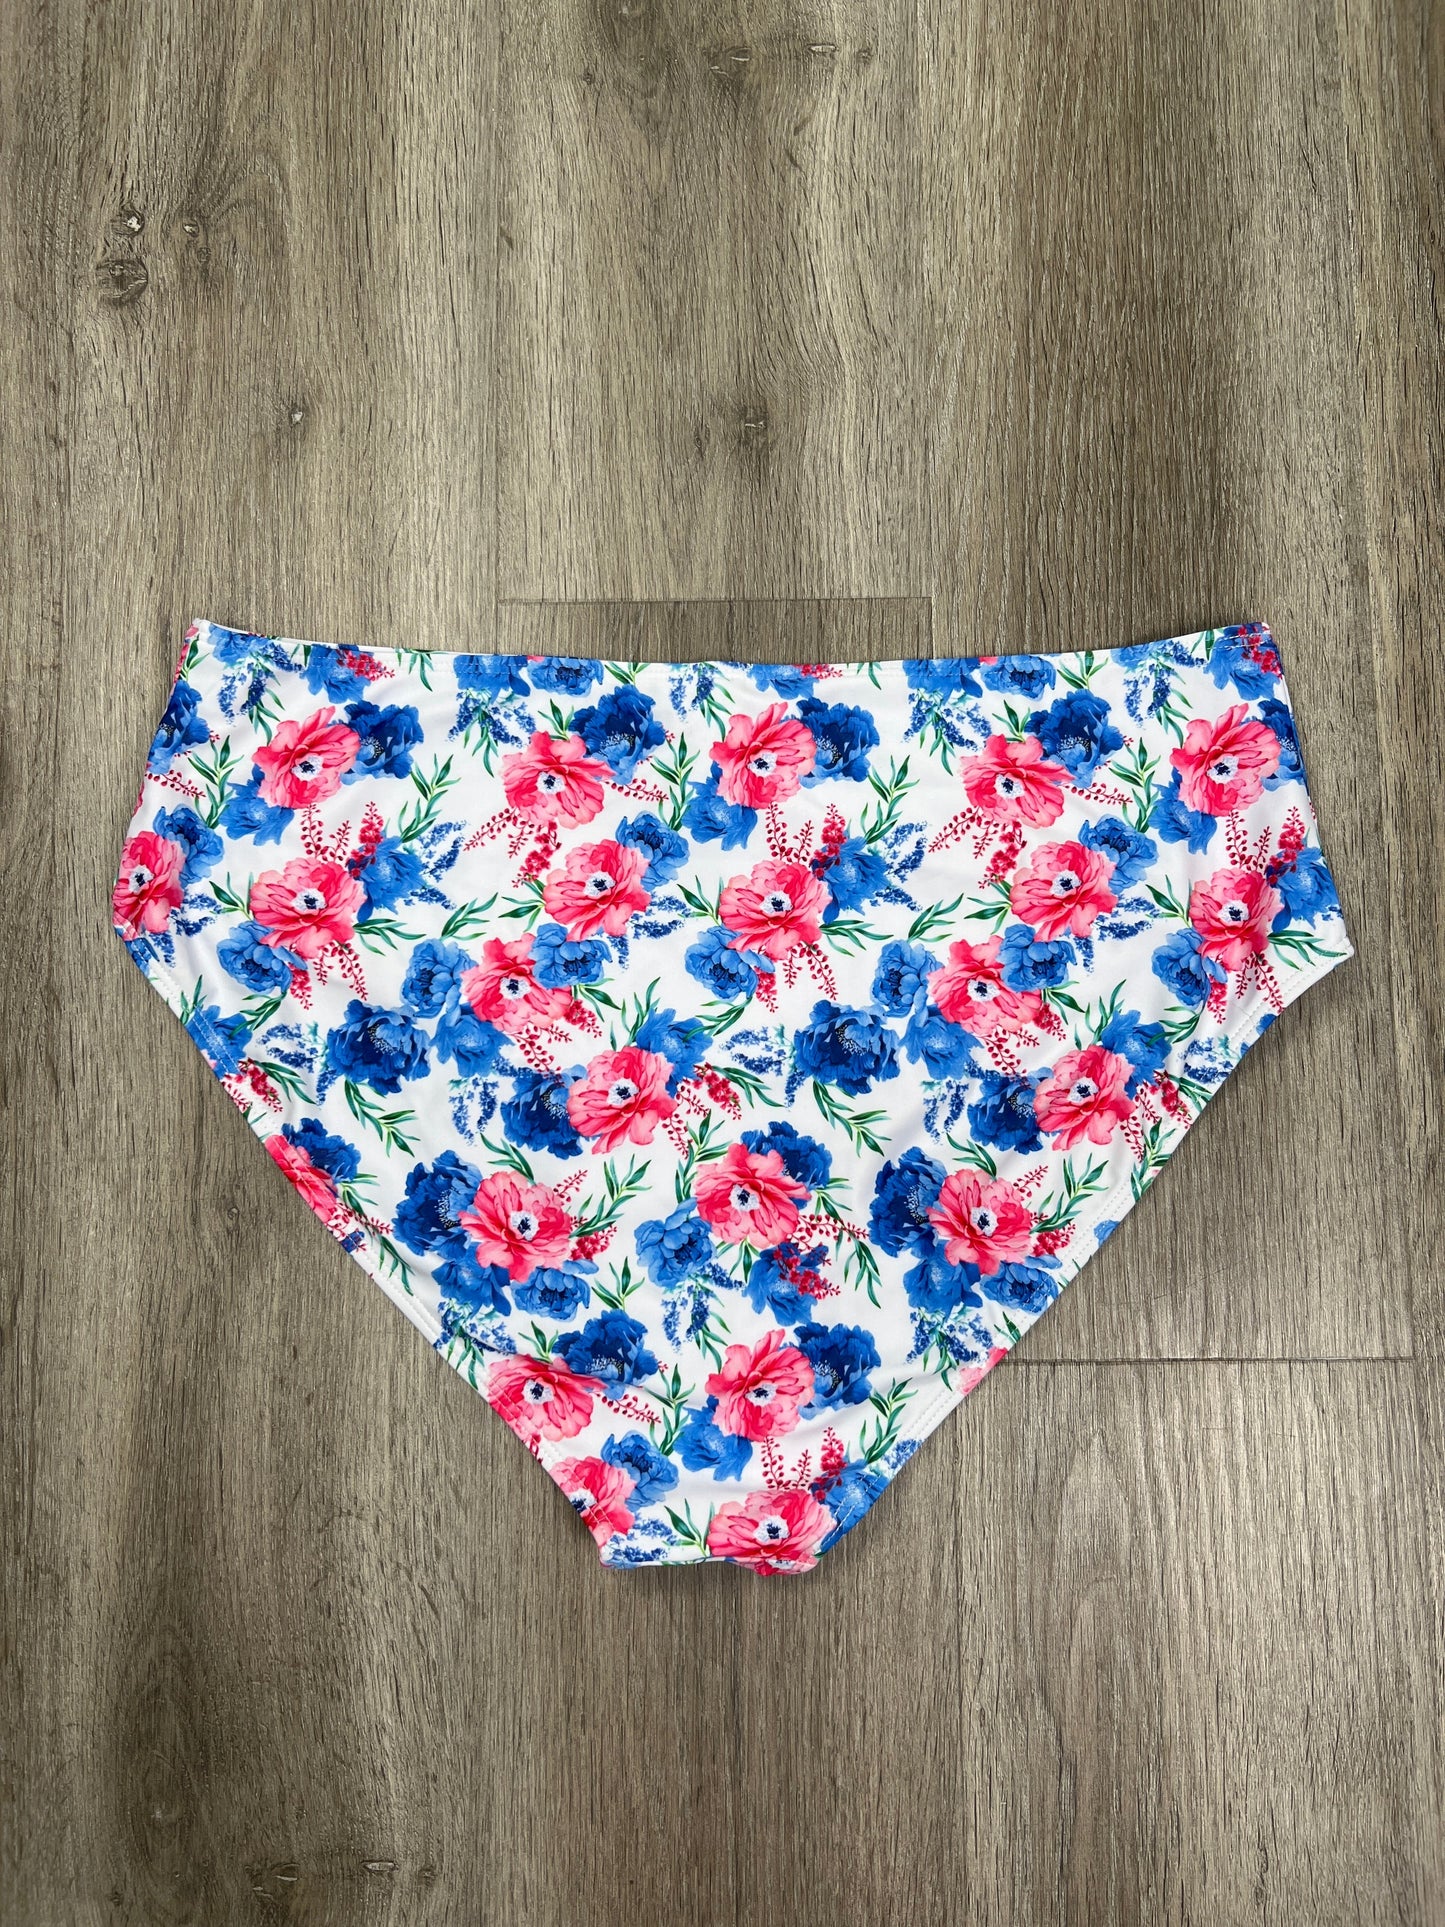 Floral Print Swimsuit Bottom Shein, Size 3x